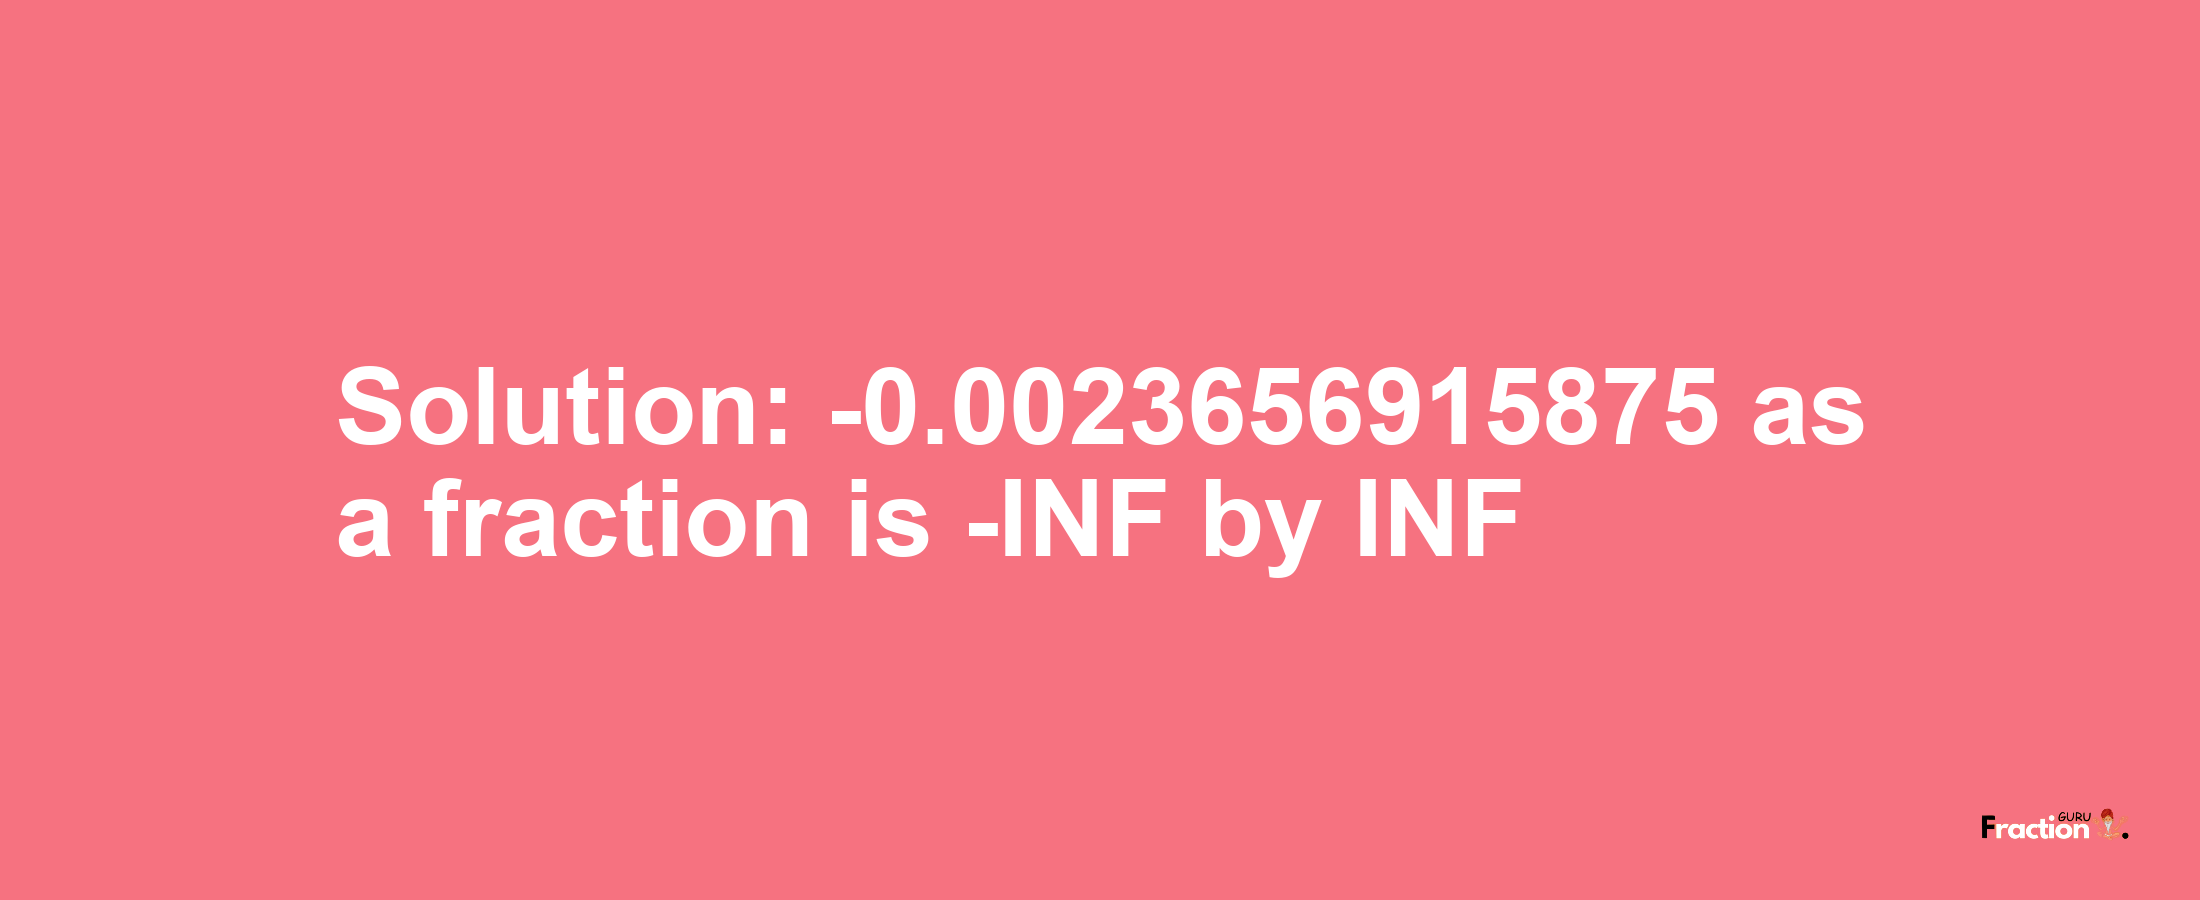 Solution:-0.0023656915875 as a fraction is -INF/INF